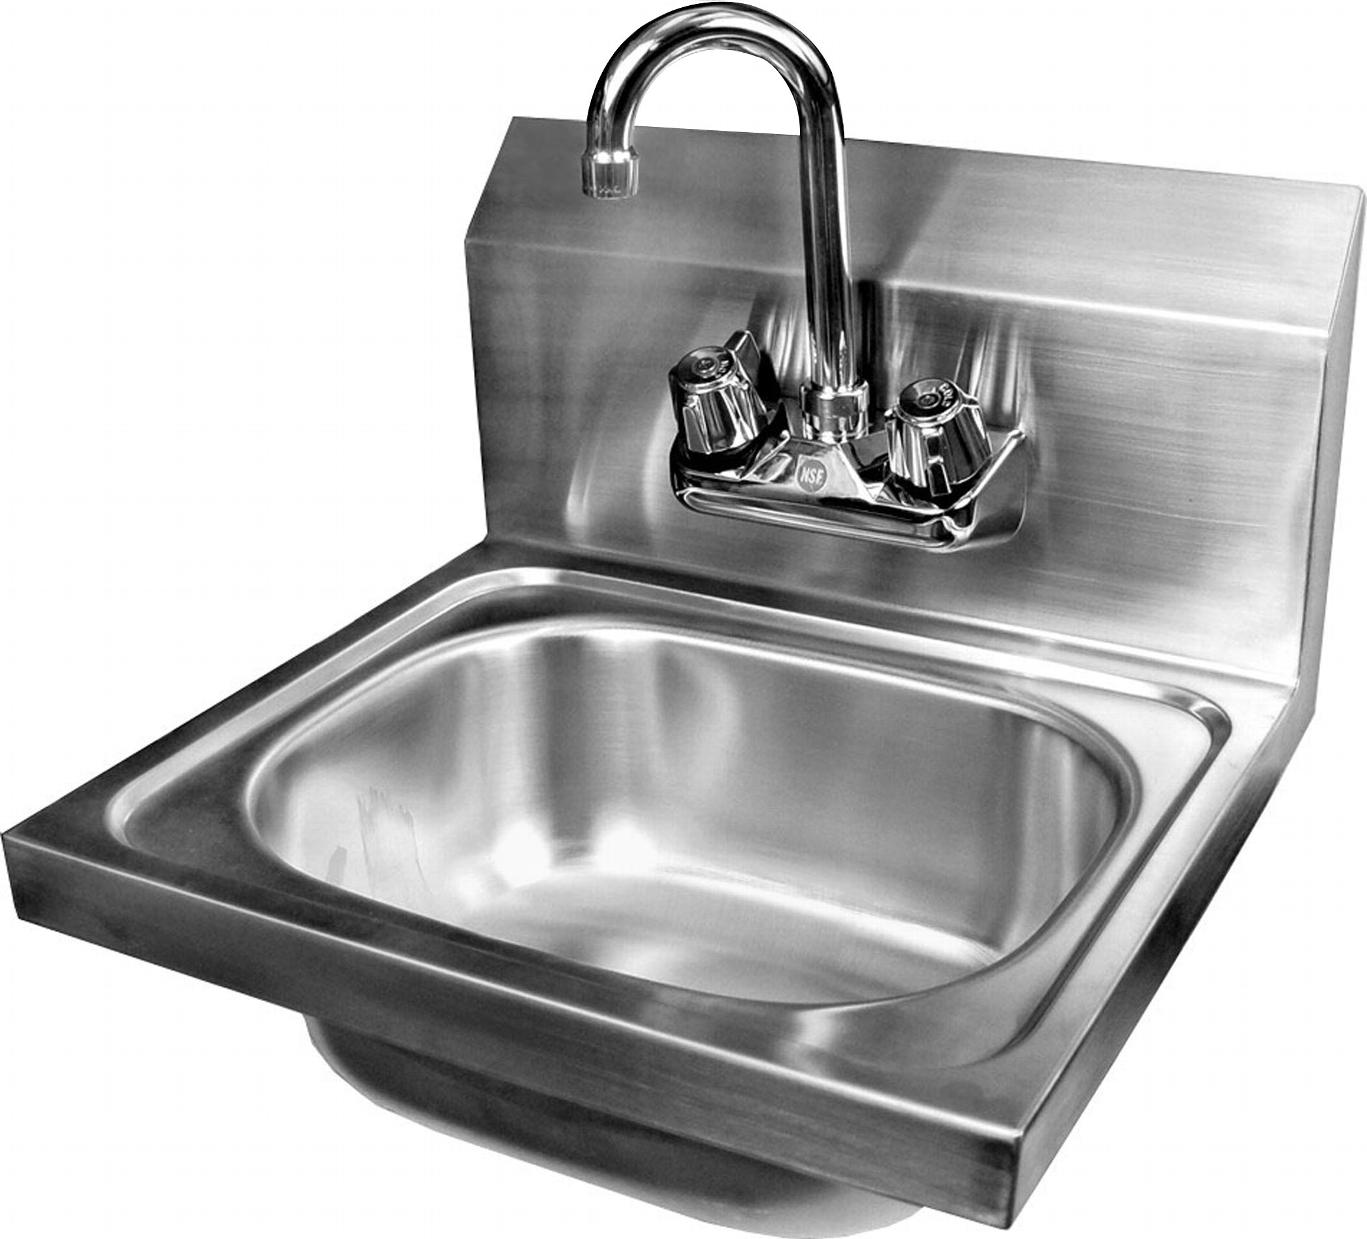 ACE Stainless Steel Wall Mount Hand Sink 16 x 15 with Knee Operated Valve and Lead Free Faucet 